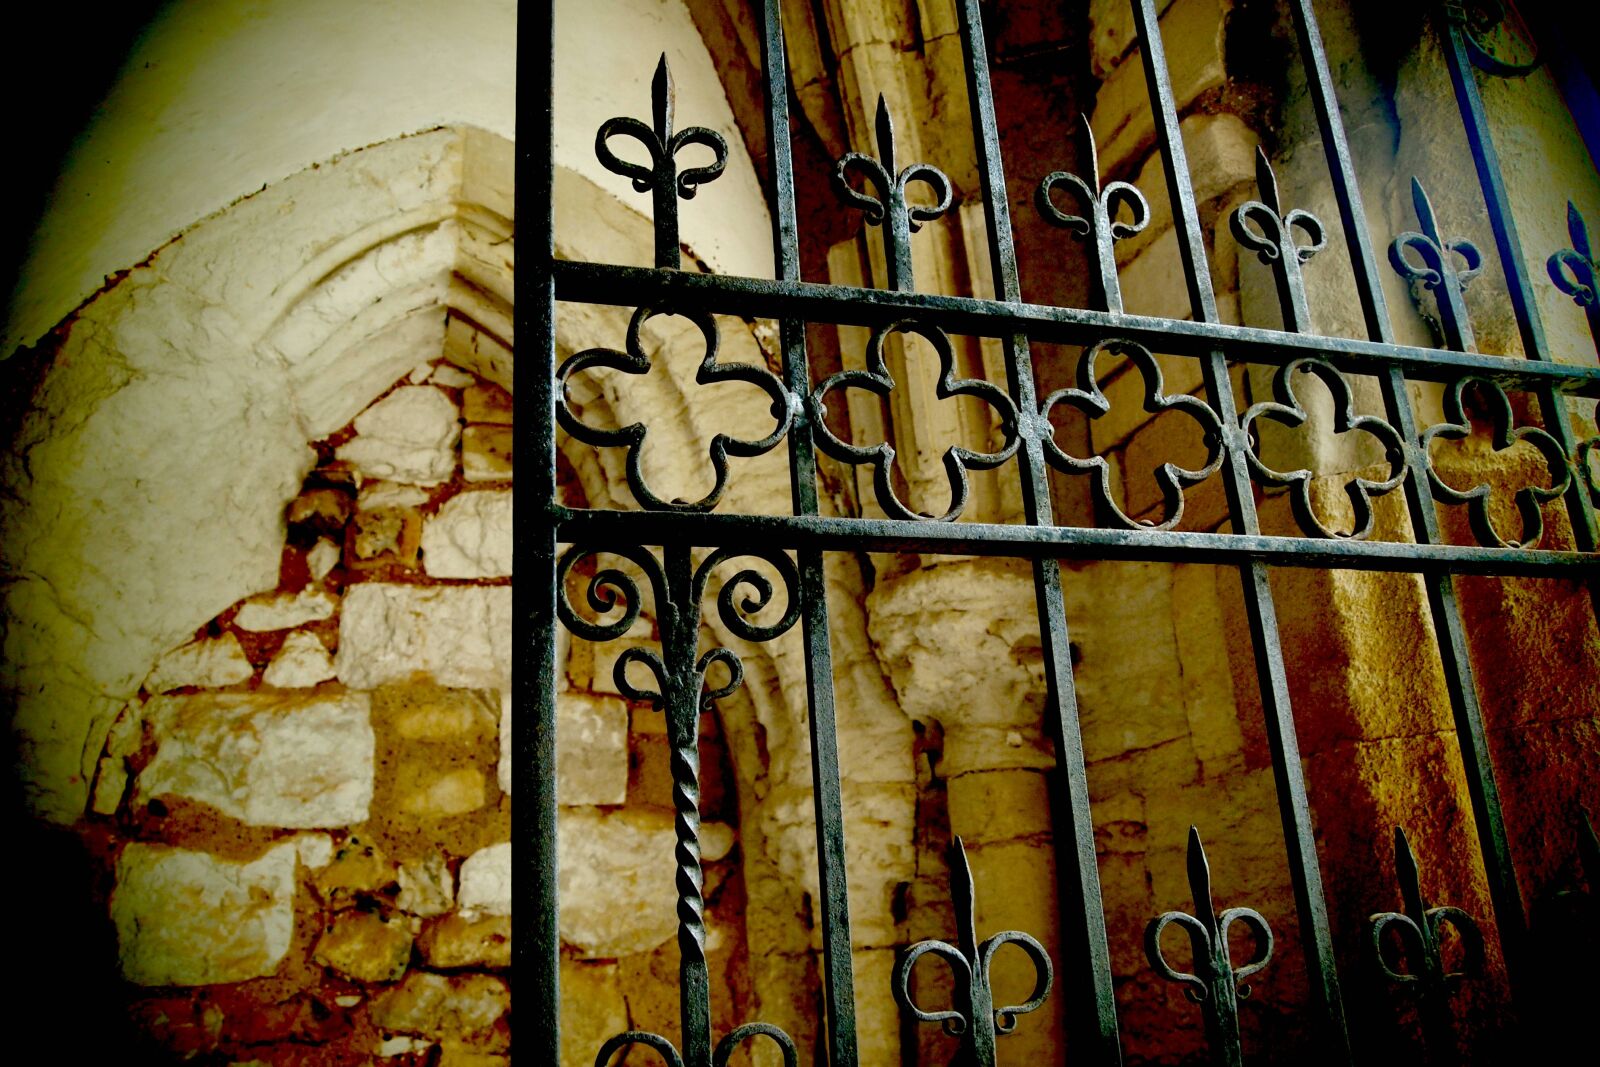 Olympus PEN E-PL1 sample photo. Arches, carved, stones, cathedral photography